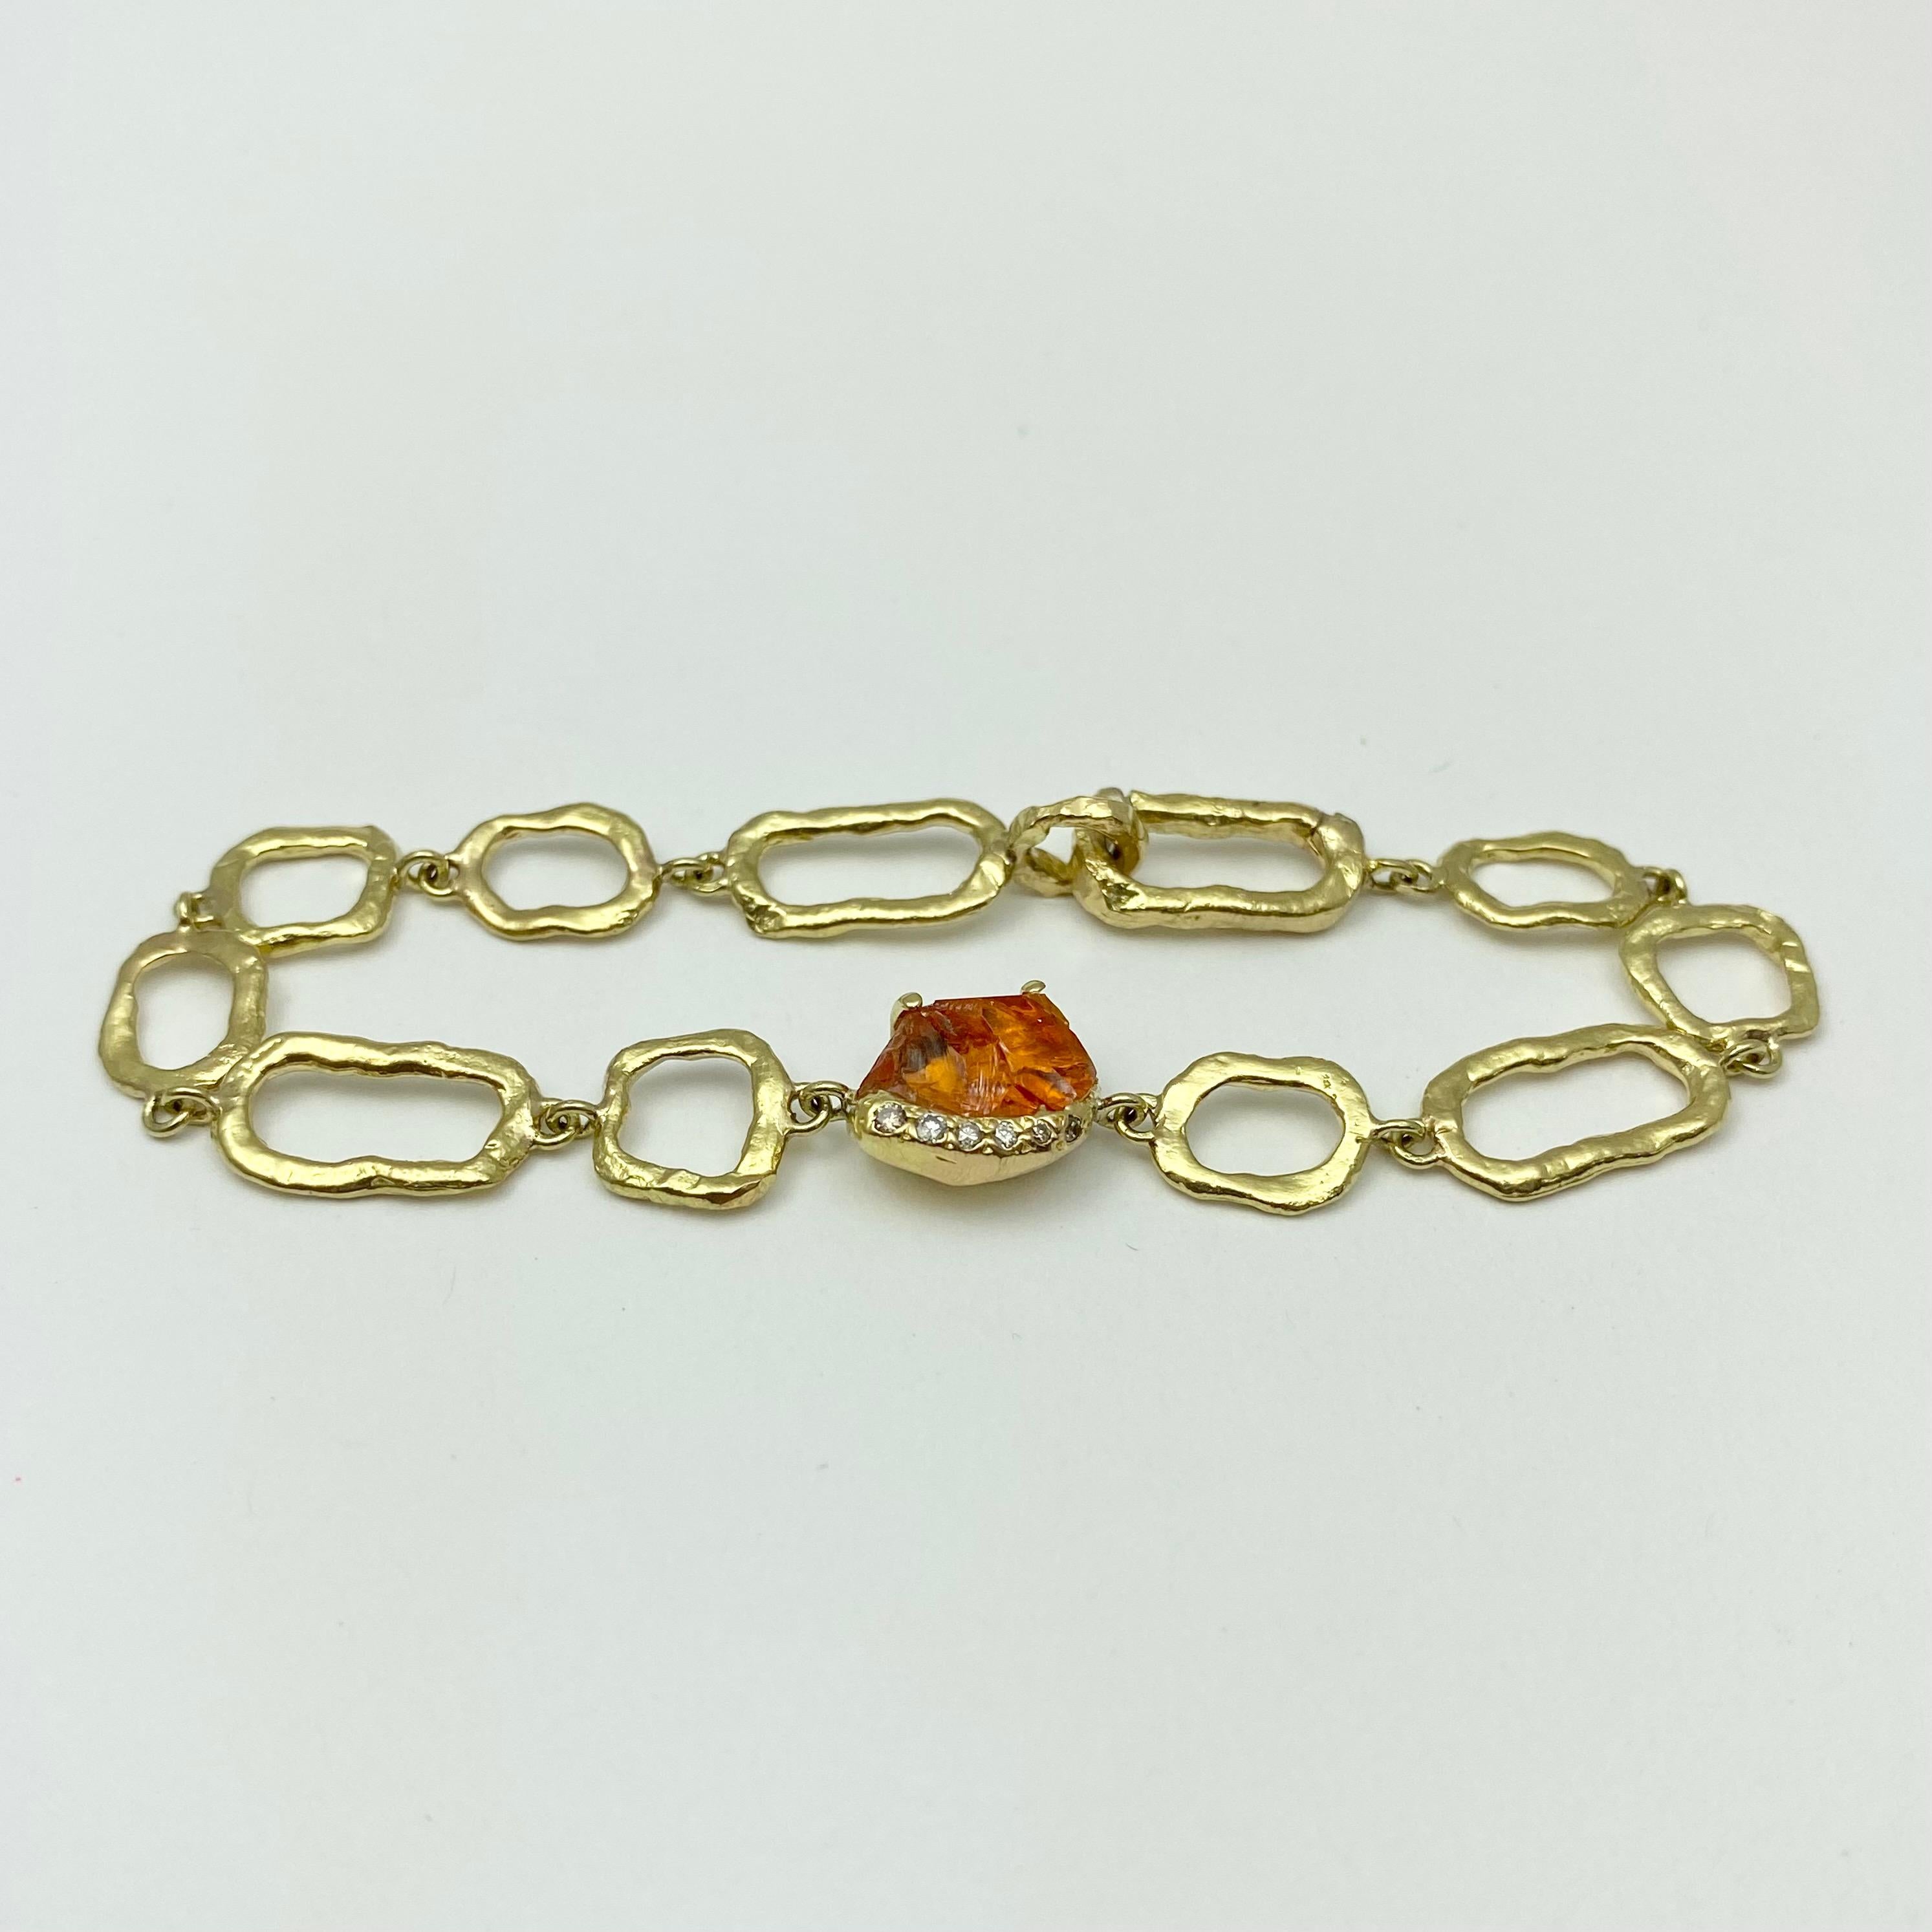 The Gladwell on Links bracelet is hand-crafted with 18-karat recycled yellow gold, and features one untreated, Tenda Cut, natural orange color spessartine garnet (also called spessartite); and six round champagne accent diamonds. The Gladwell